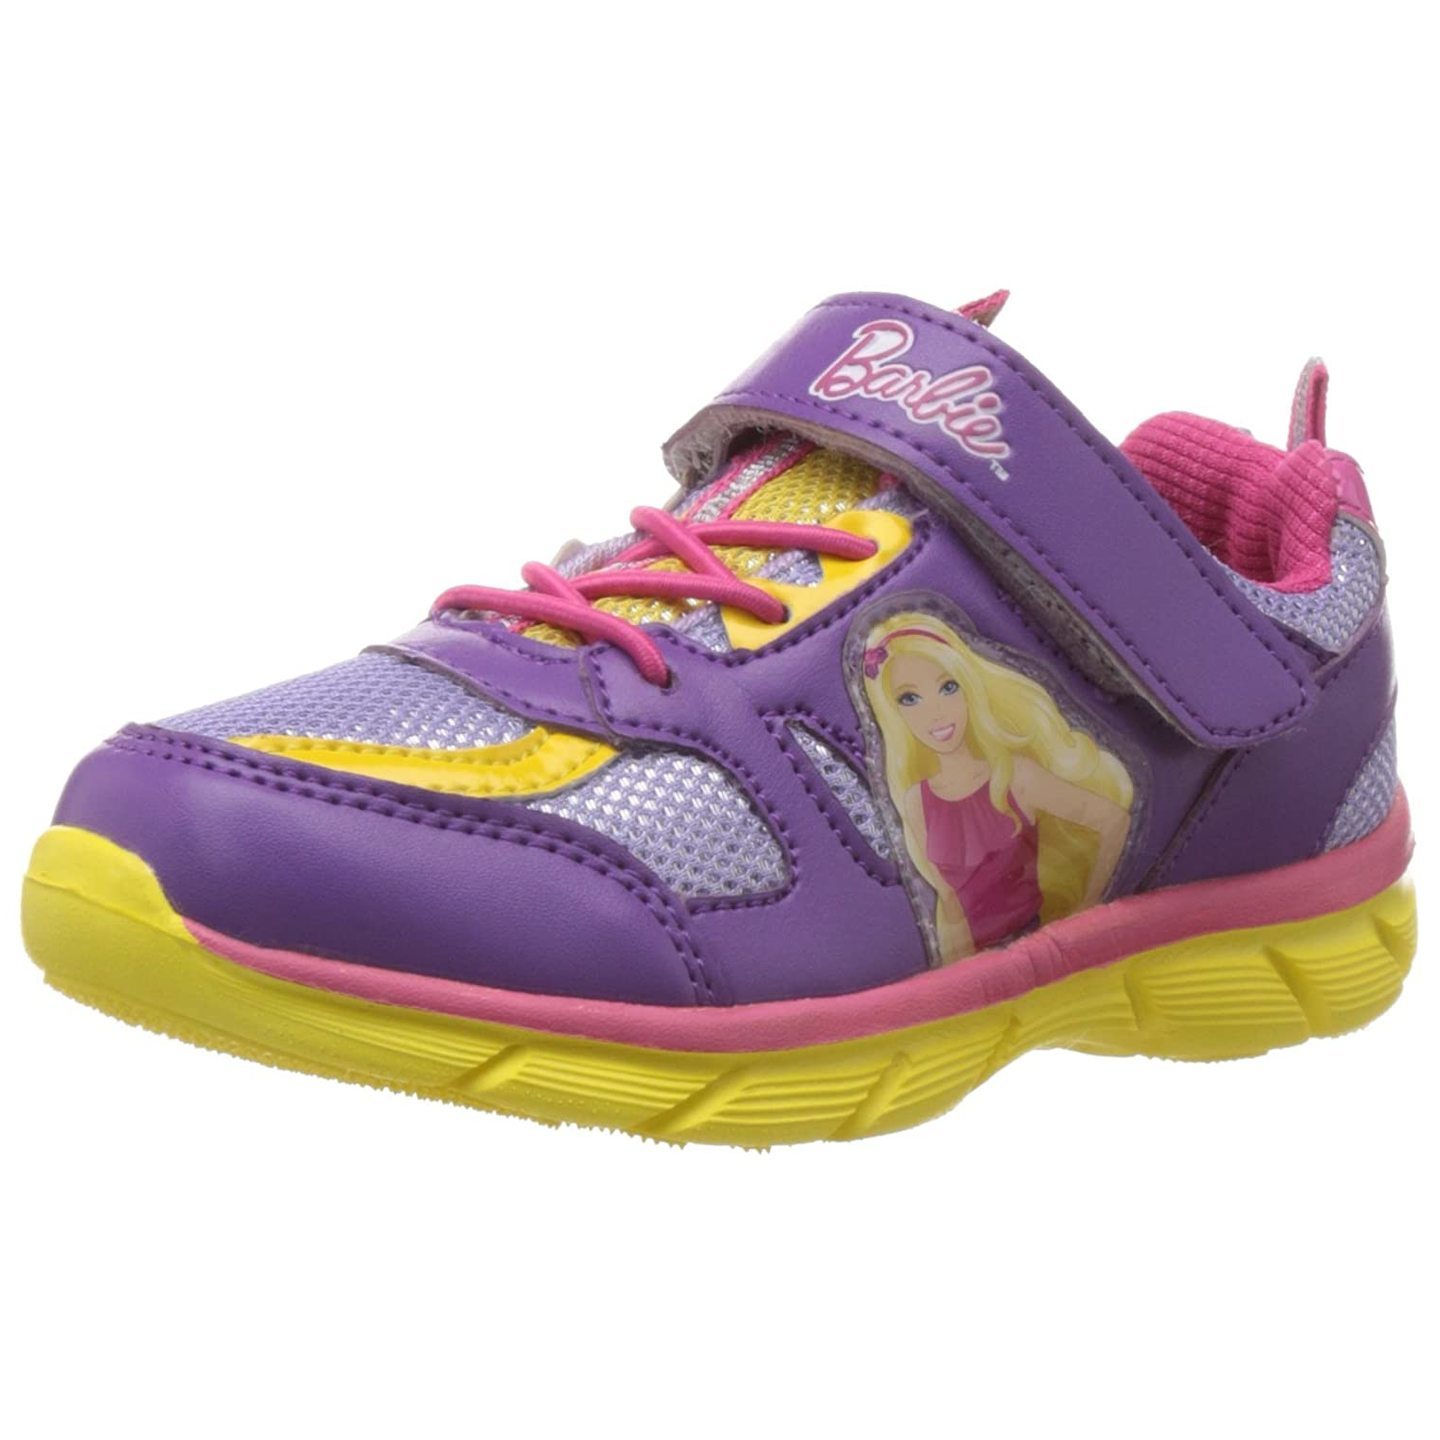 Barbie Girl's Sports Shoes